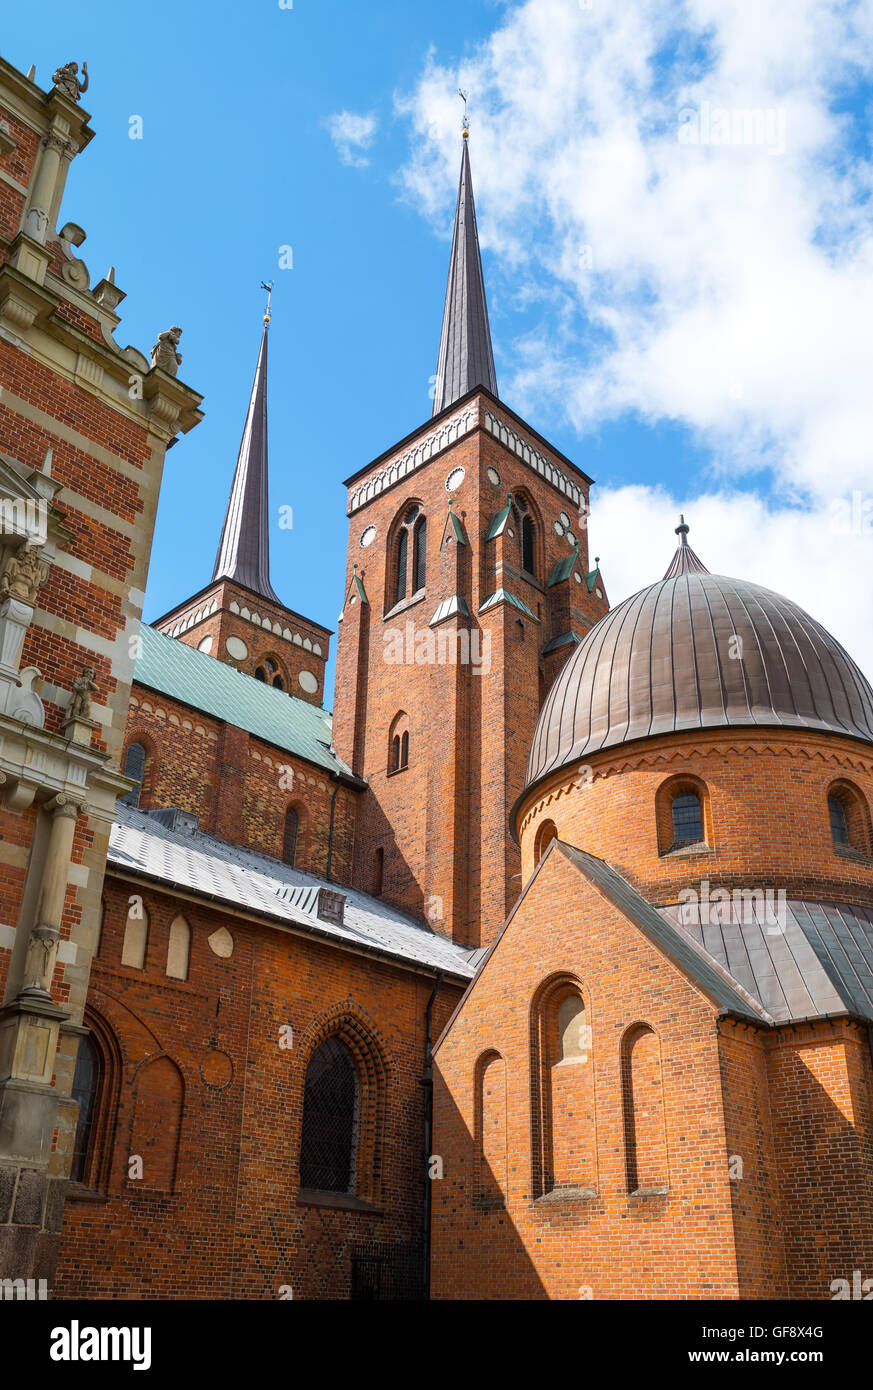 Roskilde, upward view of the Romanesque and Gothic transitional style Cathedral Stock Photo